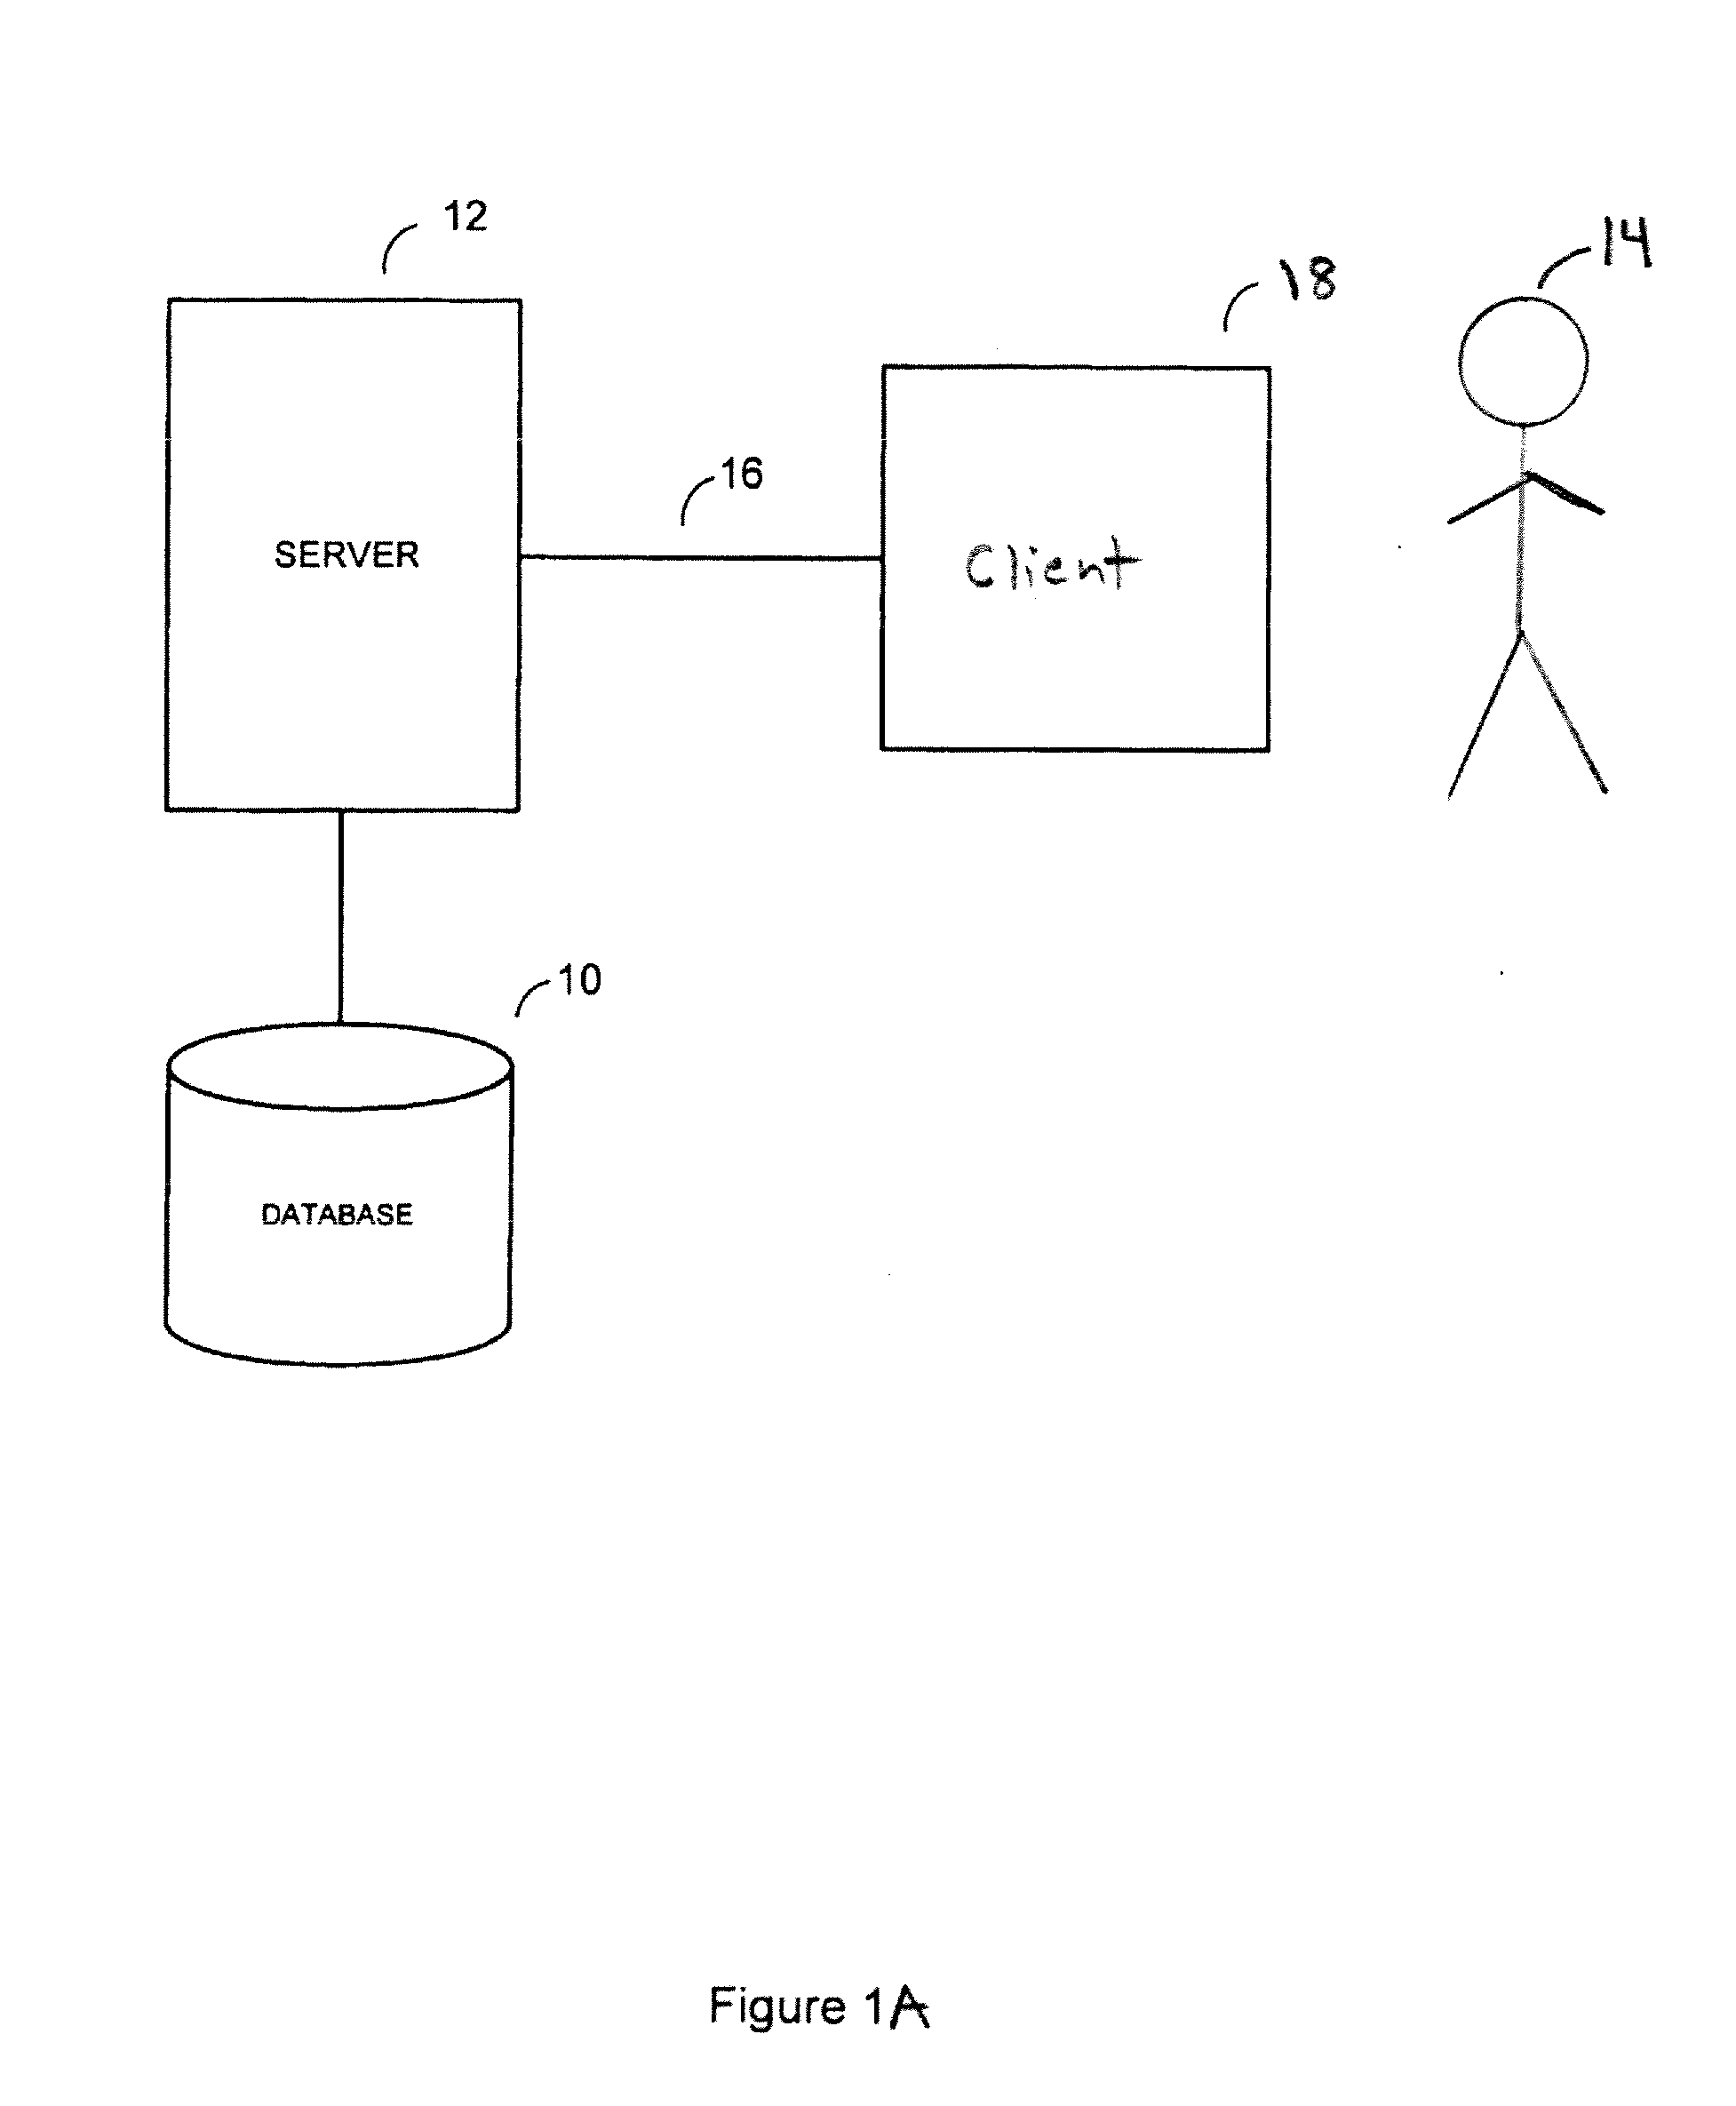 Application of query weights input to an electronic commerce information system to target advertising